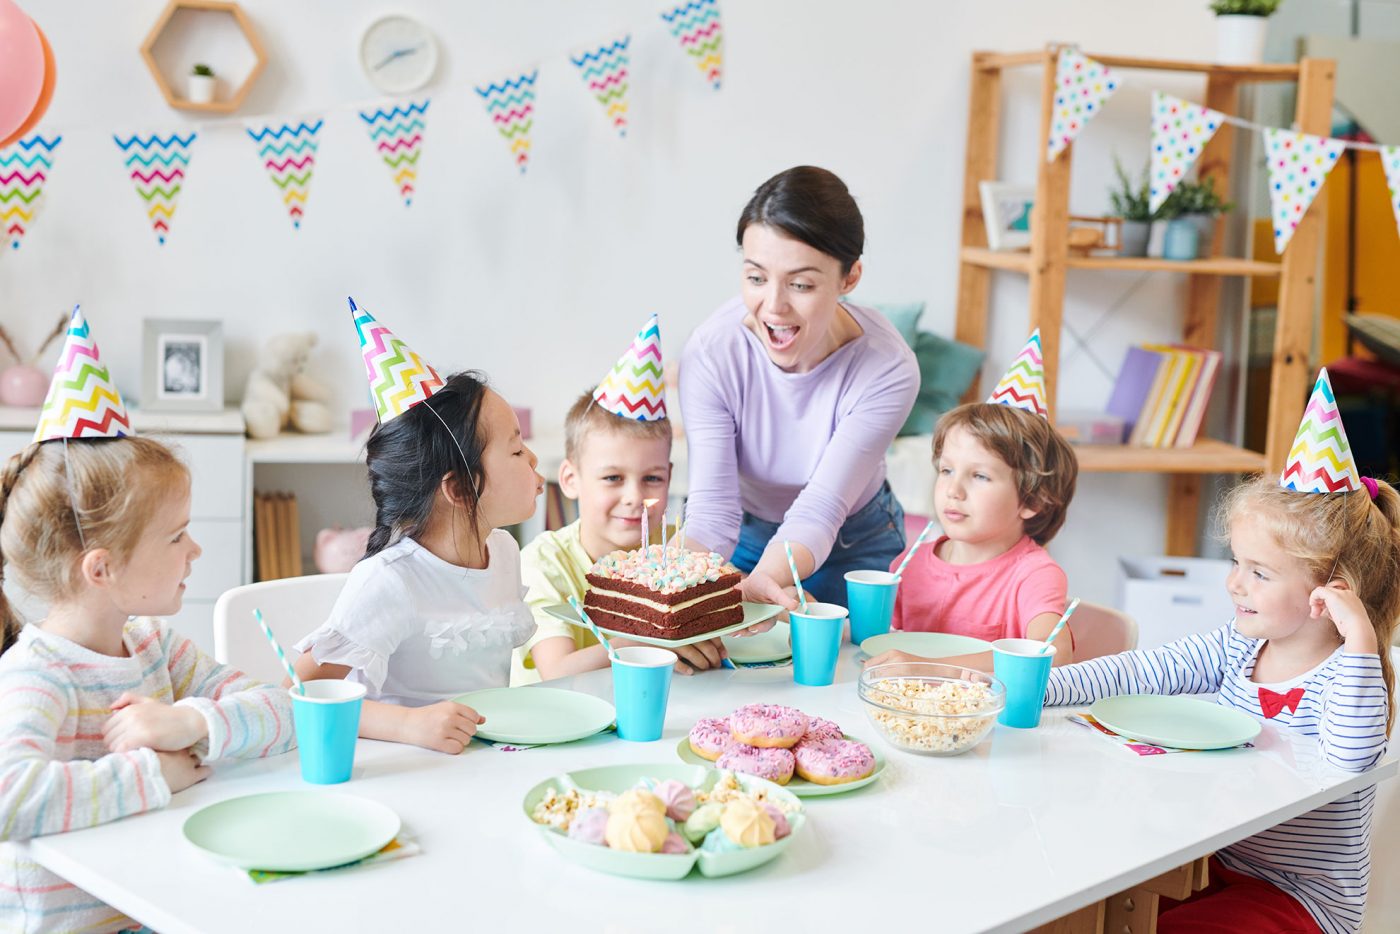 Throw a kiddie birthday party with allergy-safe snacks